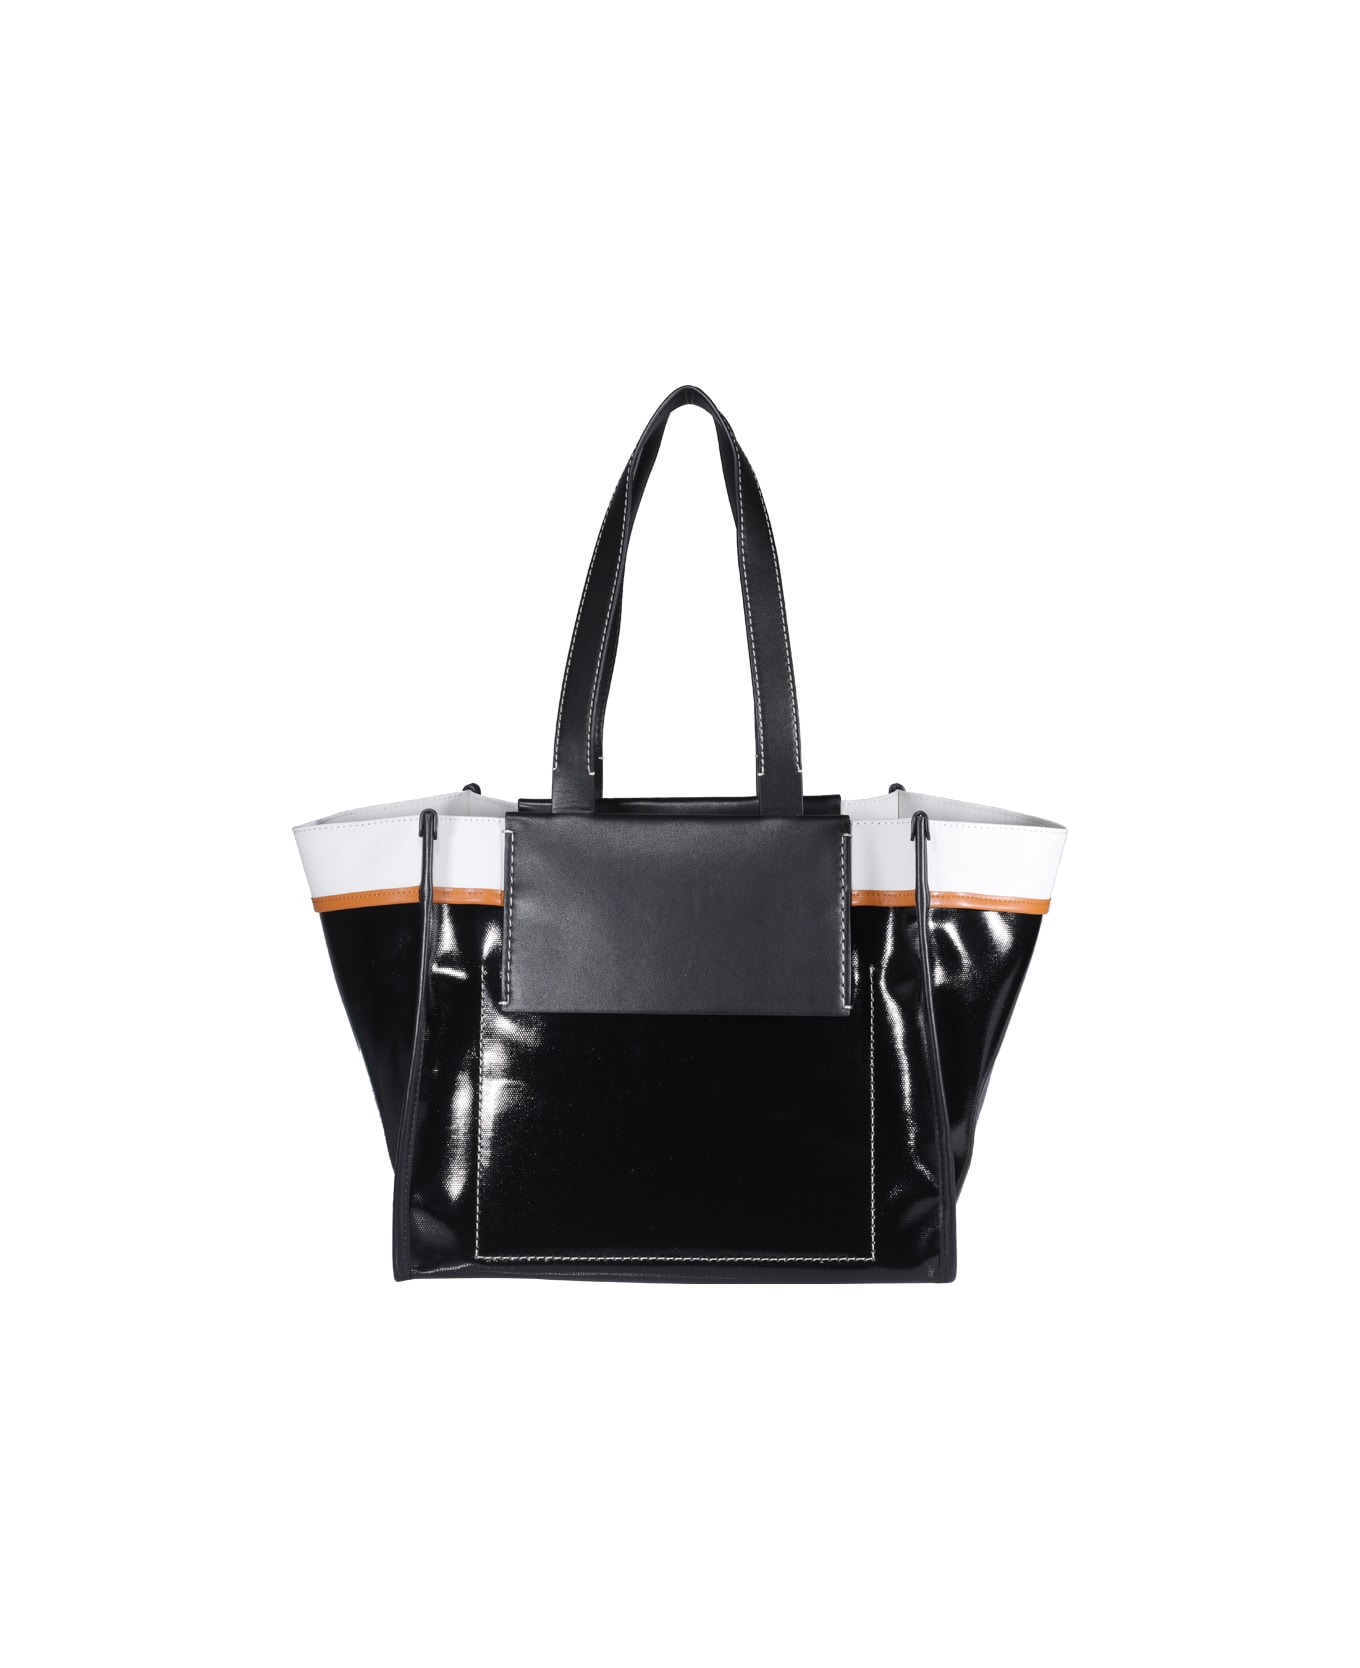 Proenza Schouler Large Morris Coated Canvas Tote - BLACK/WHITE トートバッグ